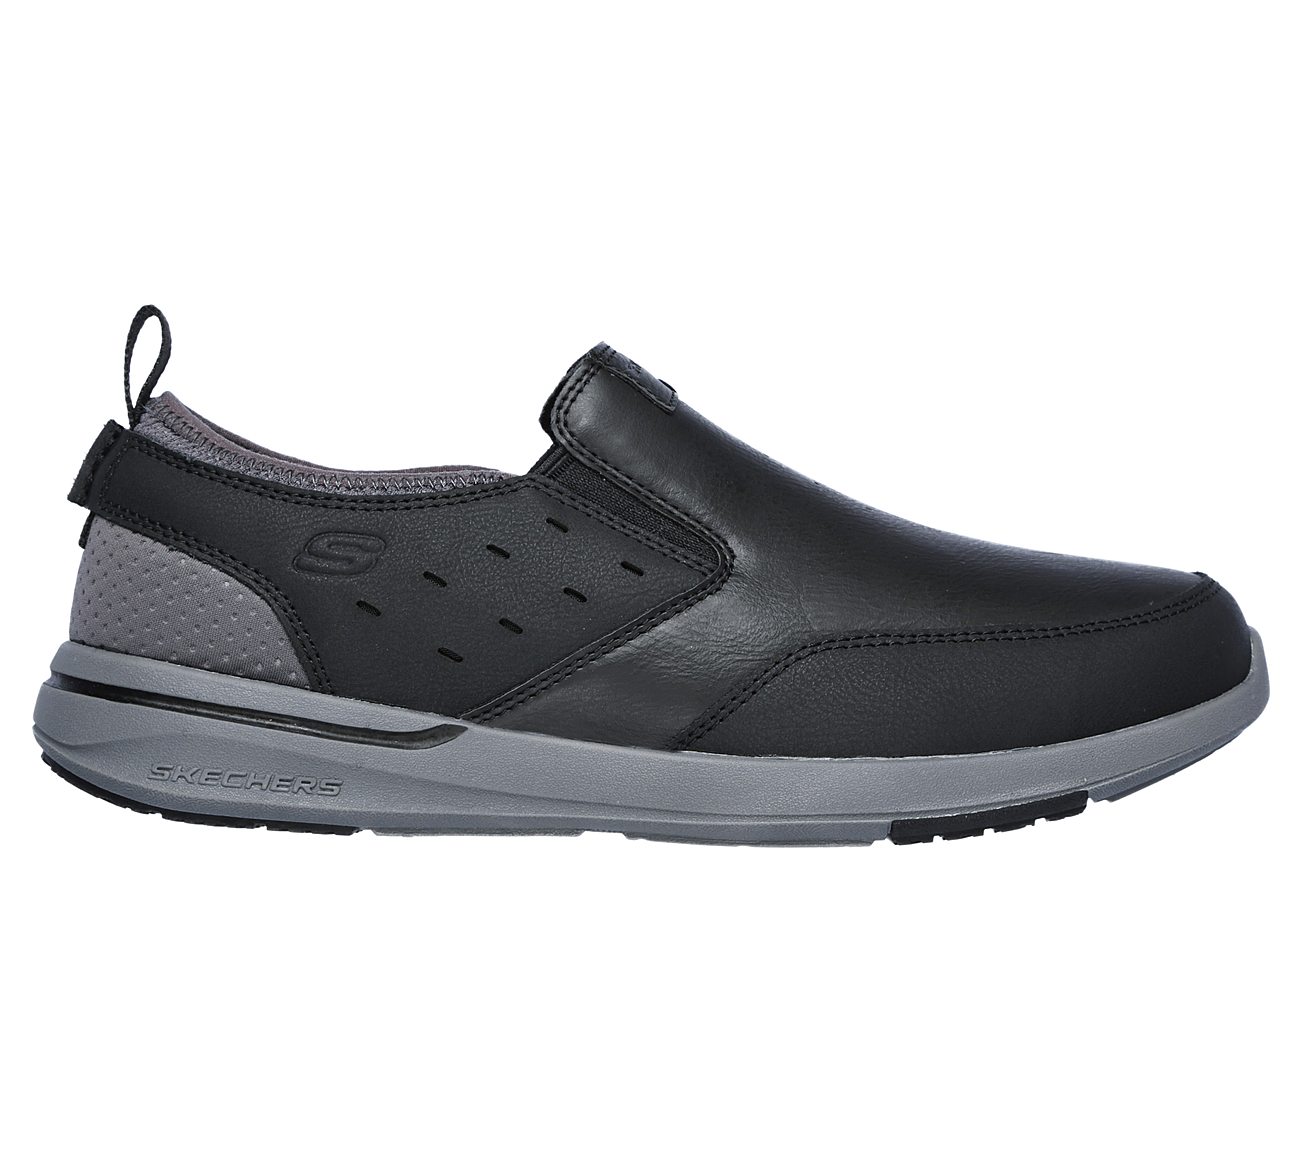 Buy SKECHERS Relaxed Fit: Elent - Torven Relaxed Fit Shoes